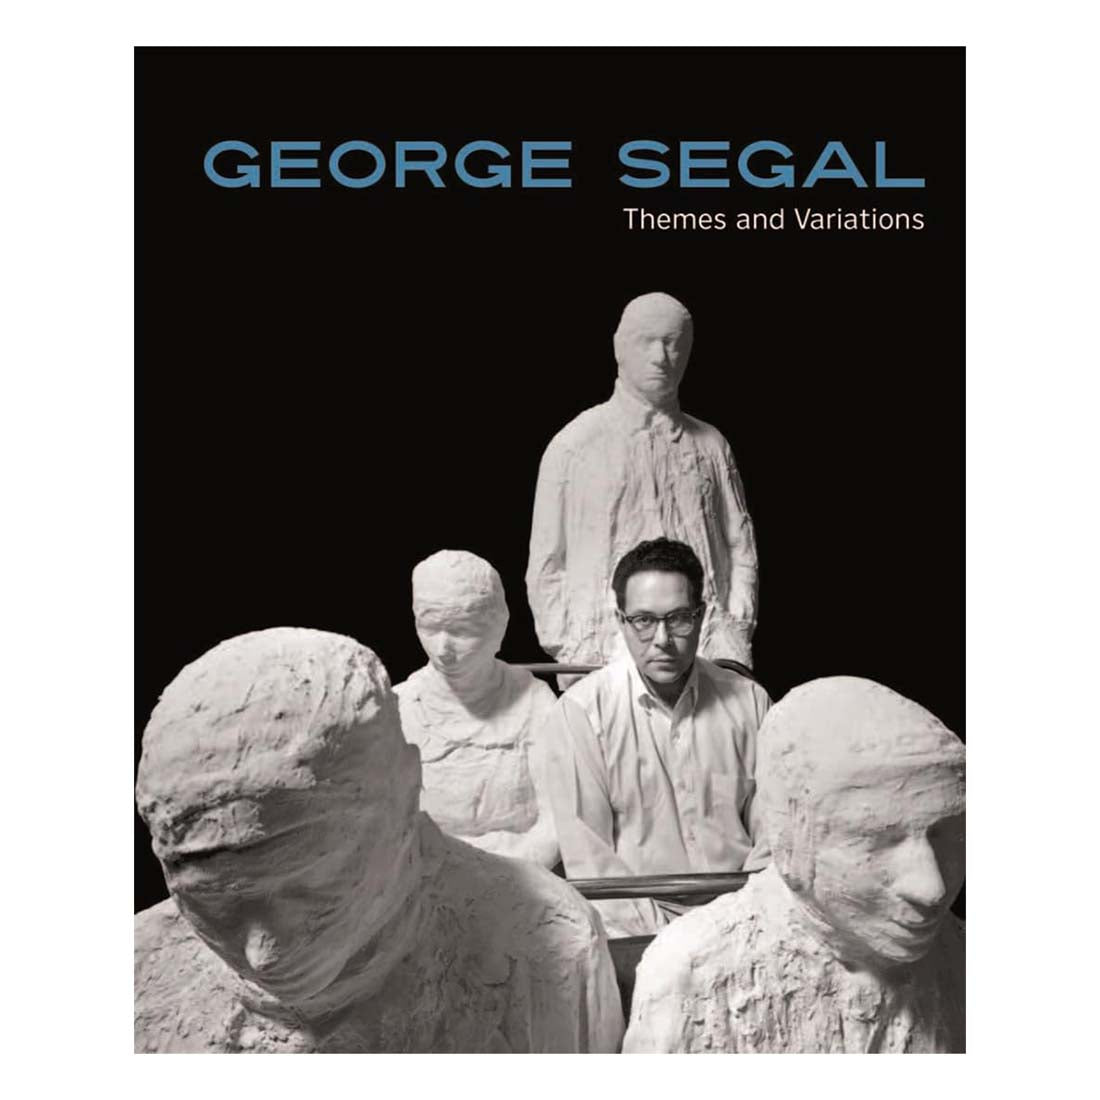 George Segal: Themes and Variations